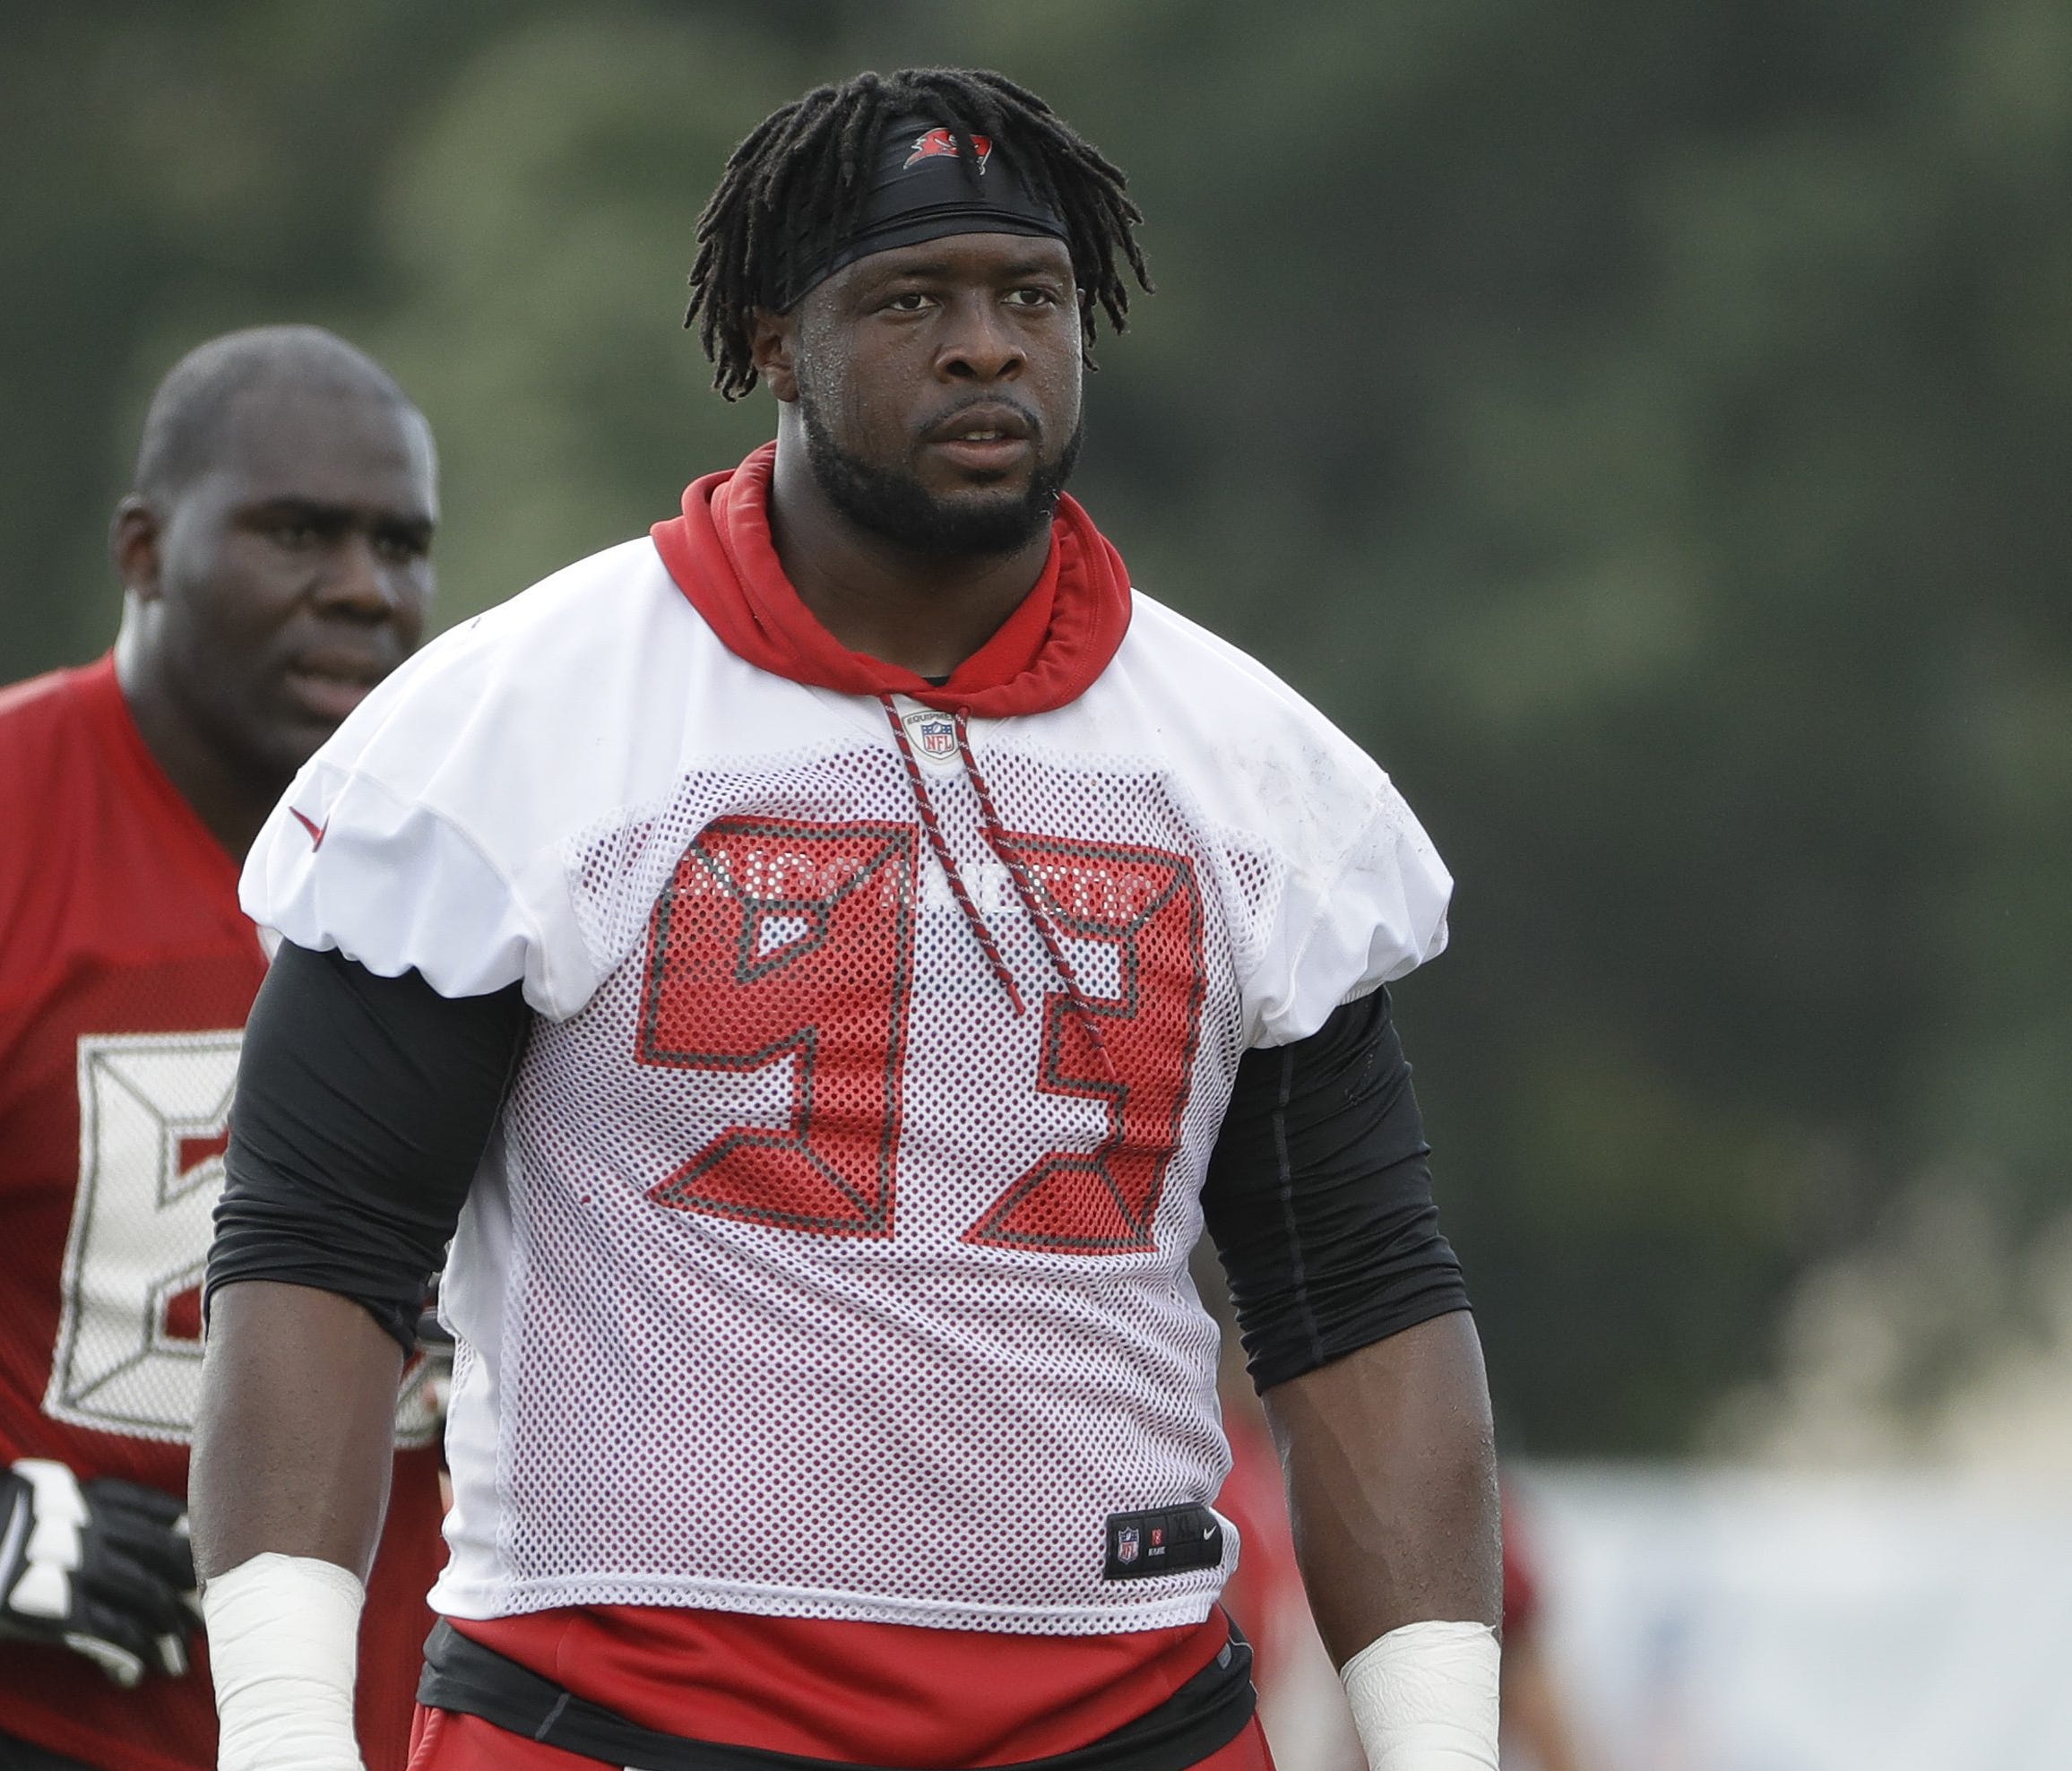 Tampa Bay Buccaneers defensive tackle Gerald McCoy (93) during an NFL football training camp practice Saturday, July 29, 2017, in Tampa, Fla. (AP Photo/Chris O'Meara) ORG XMIT: FLCO